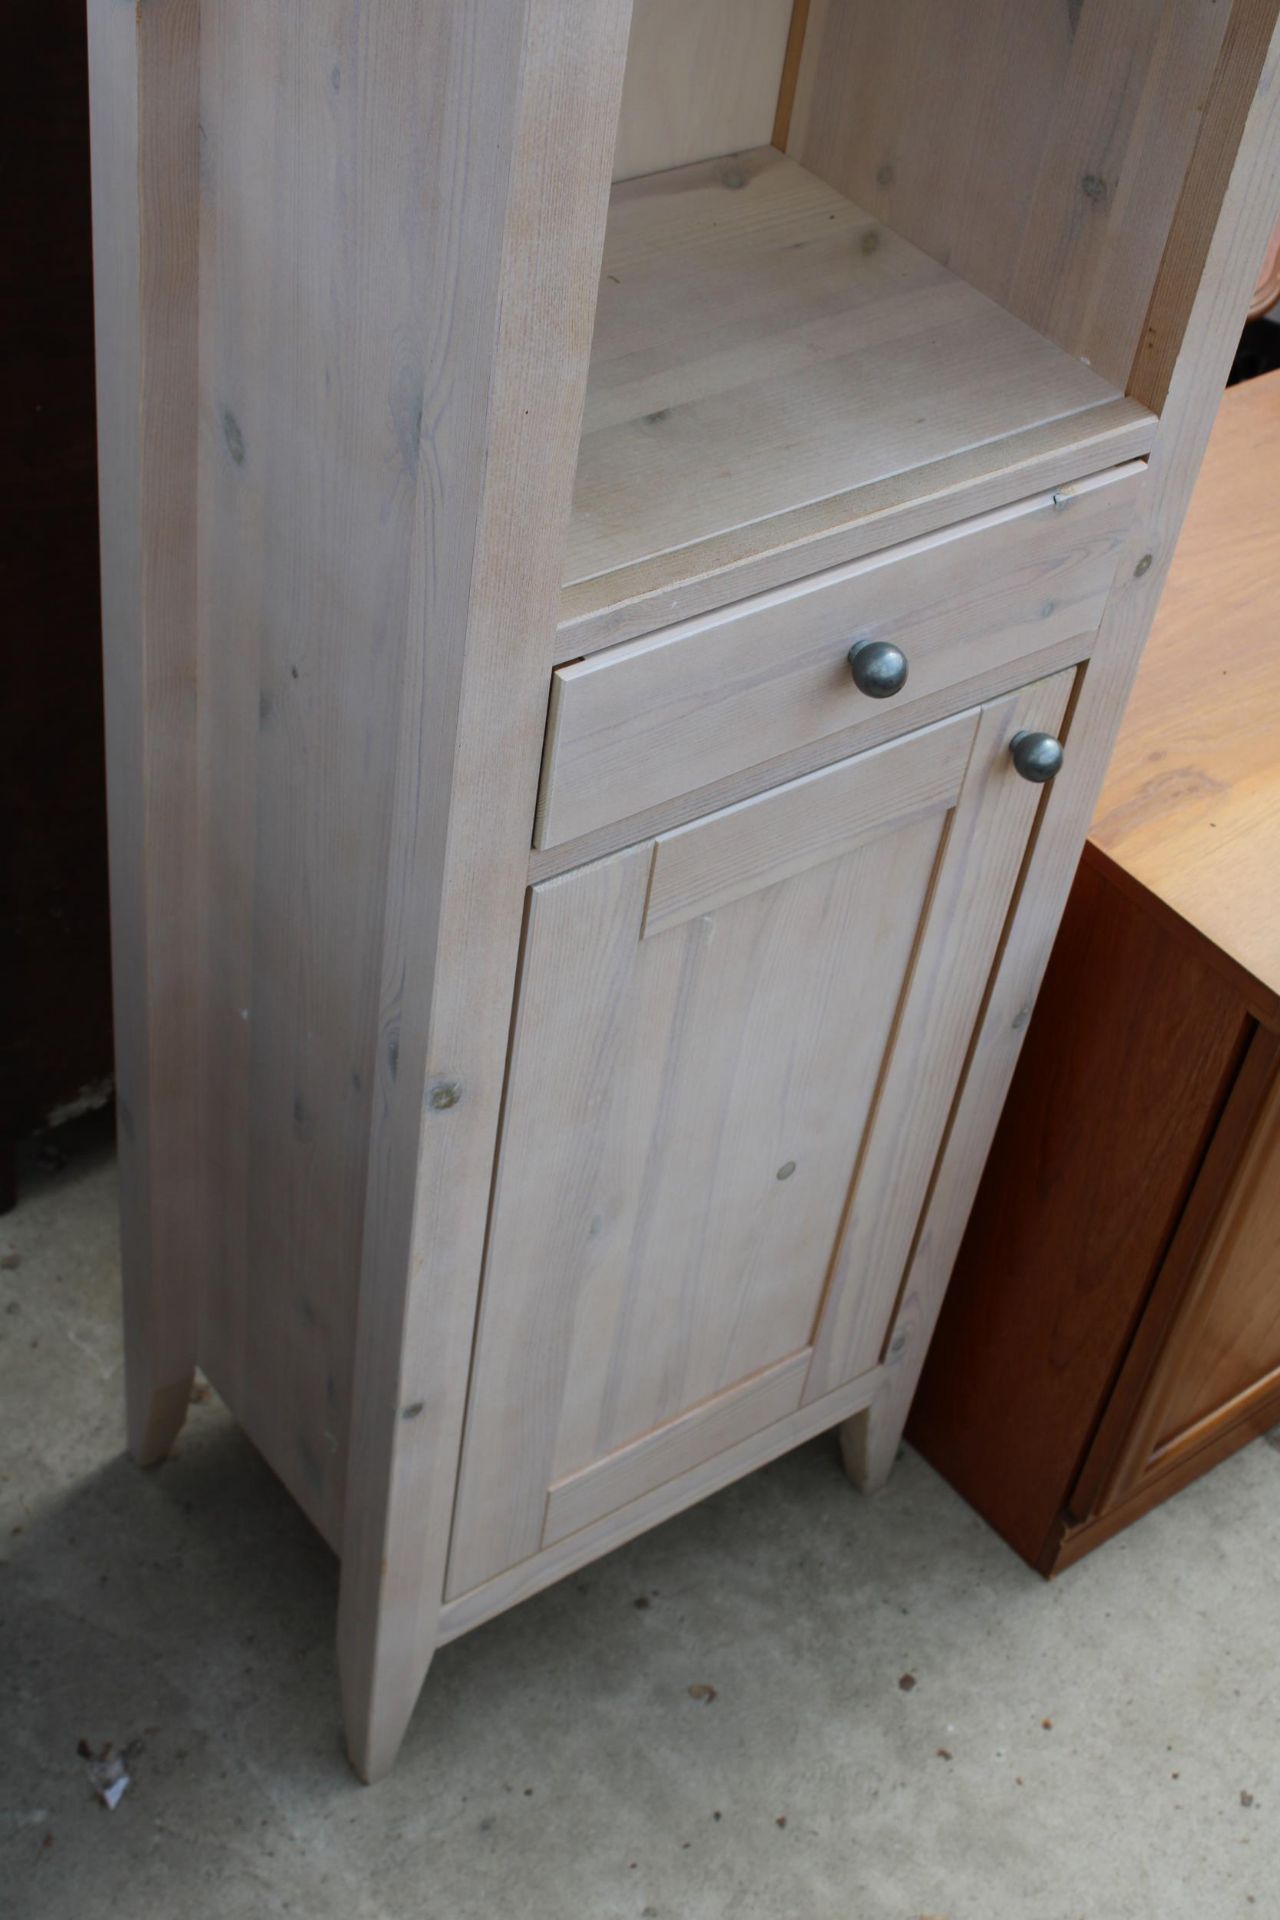 A MODERN PINE LIMED NARROW STORAGE UNIT, 19" WIDE - Image 3 of 3